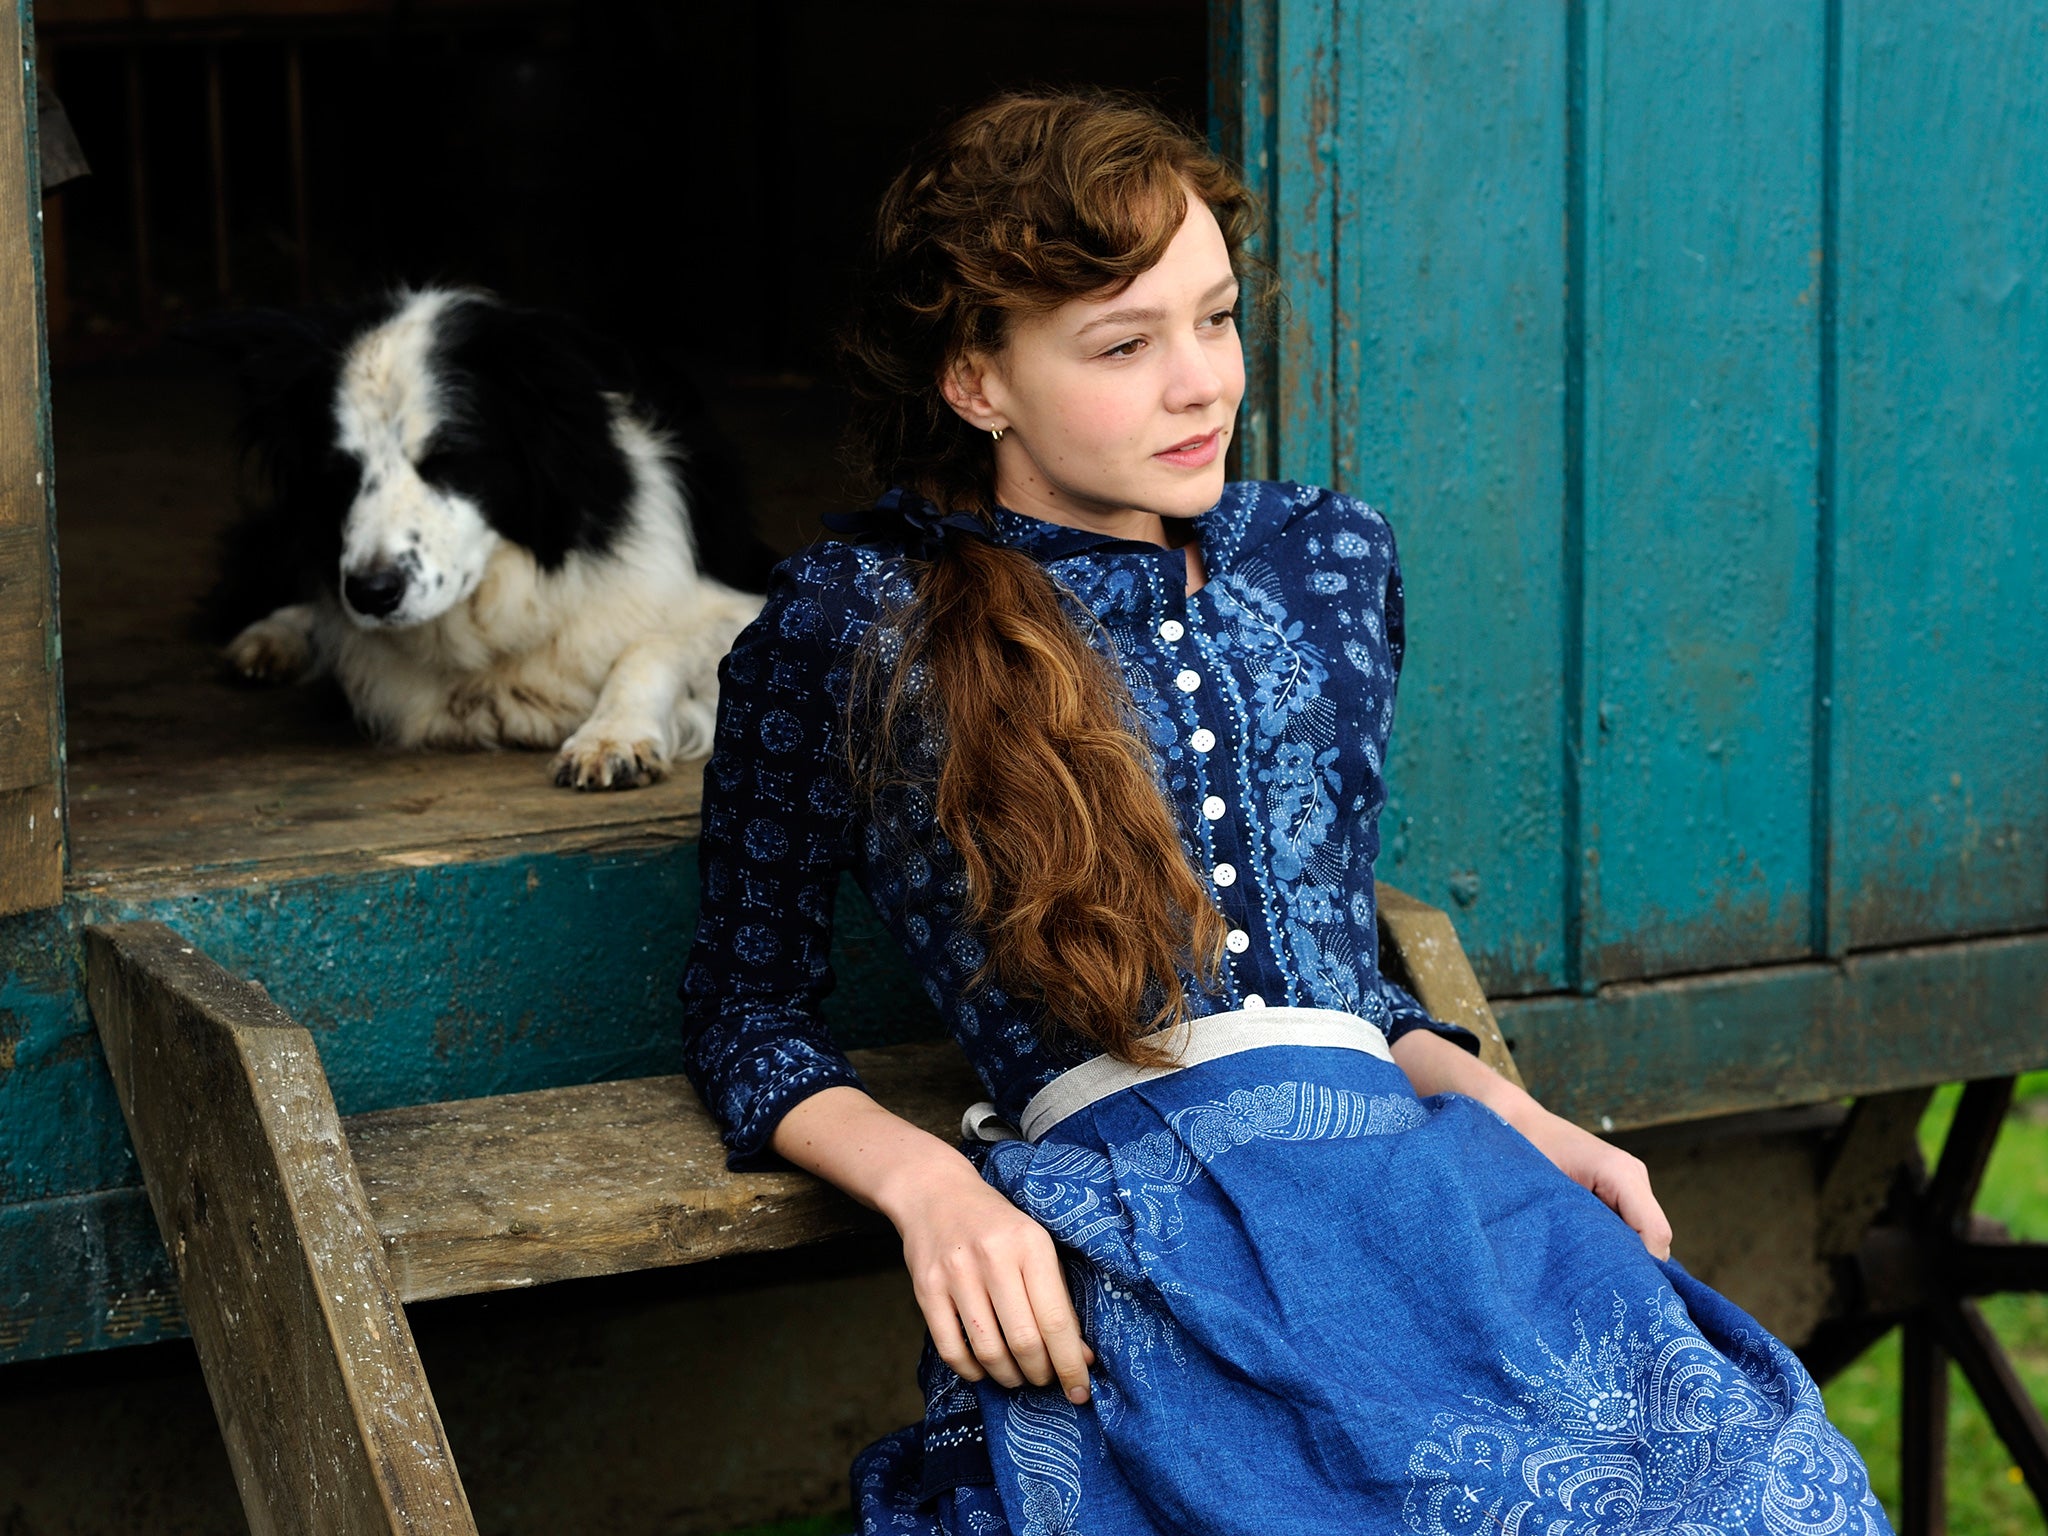 ‘Far from the Madding Crowd’, which stars Carey Mulligan, is part of the bank holiday ‘madness’